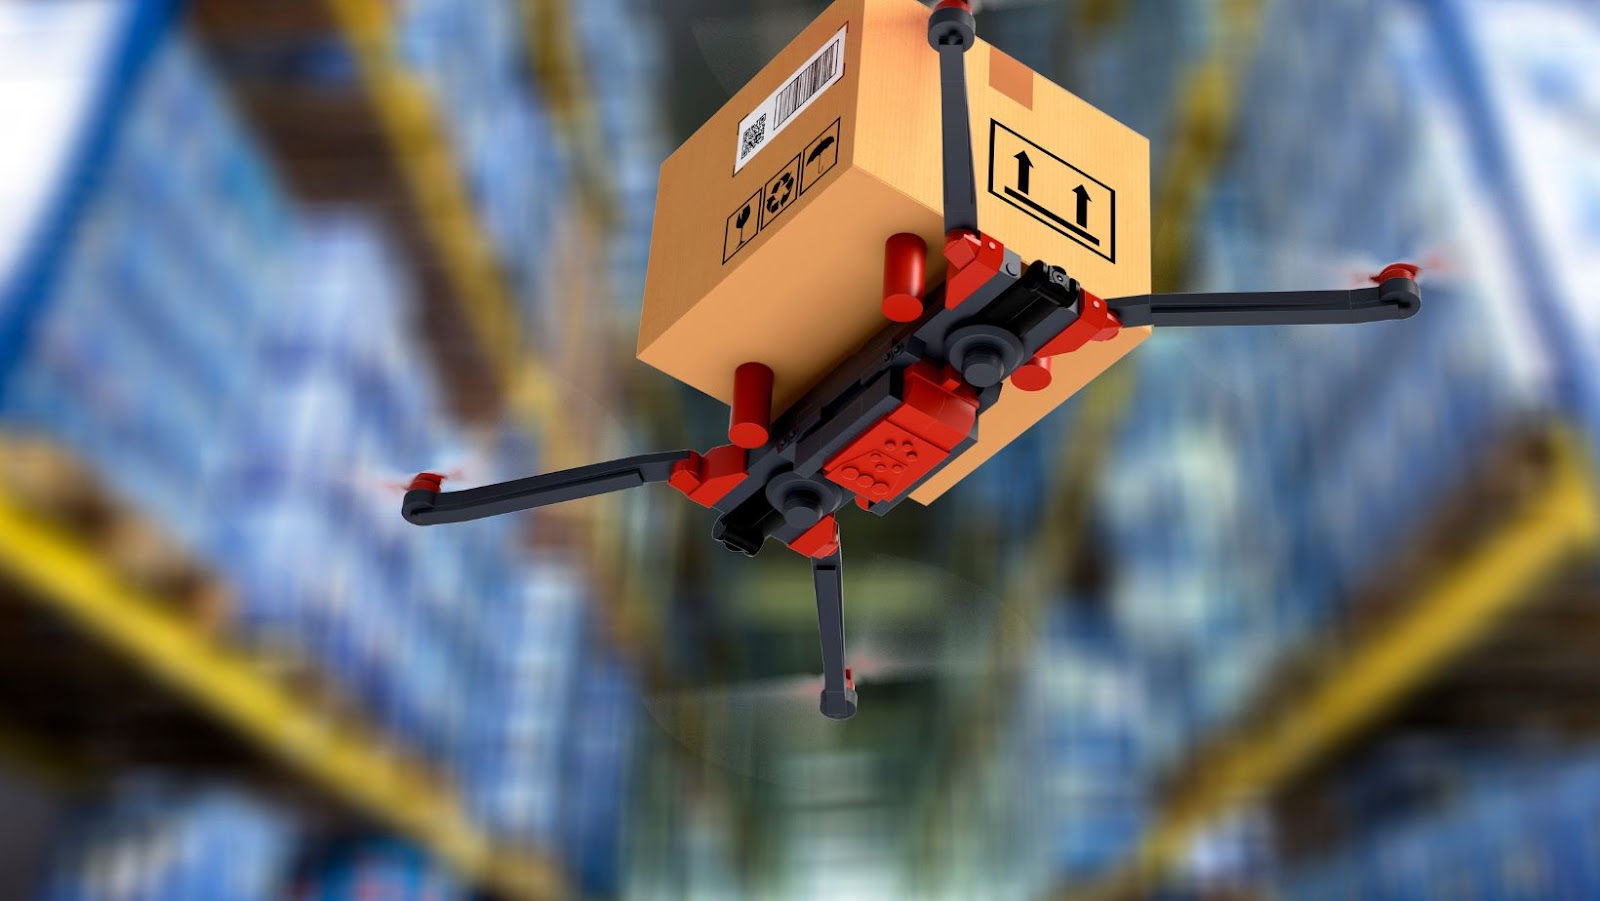 Why Walmart is using drones to deliver packages